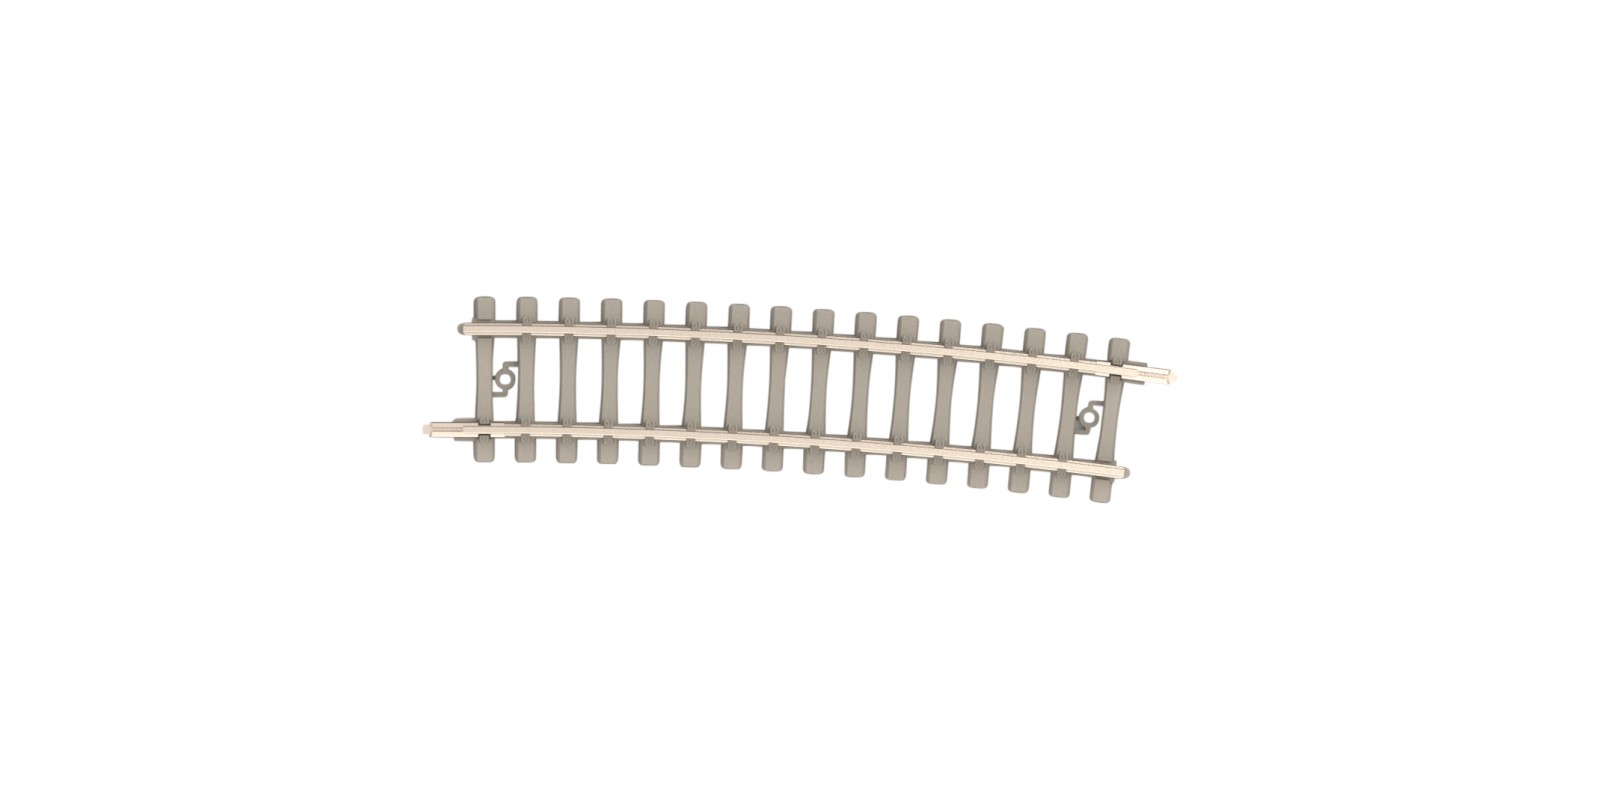 T14515 Curved Track with Concrete Ties